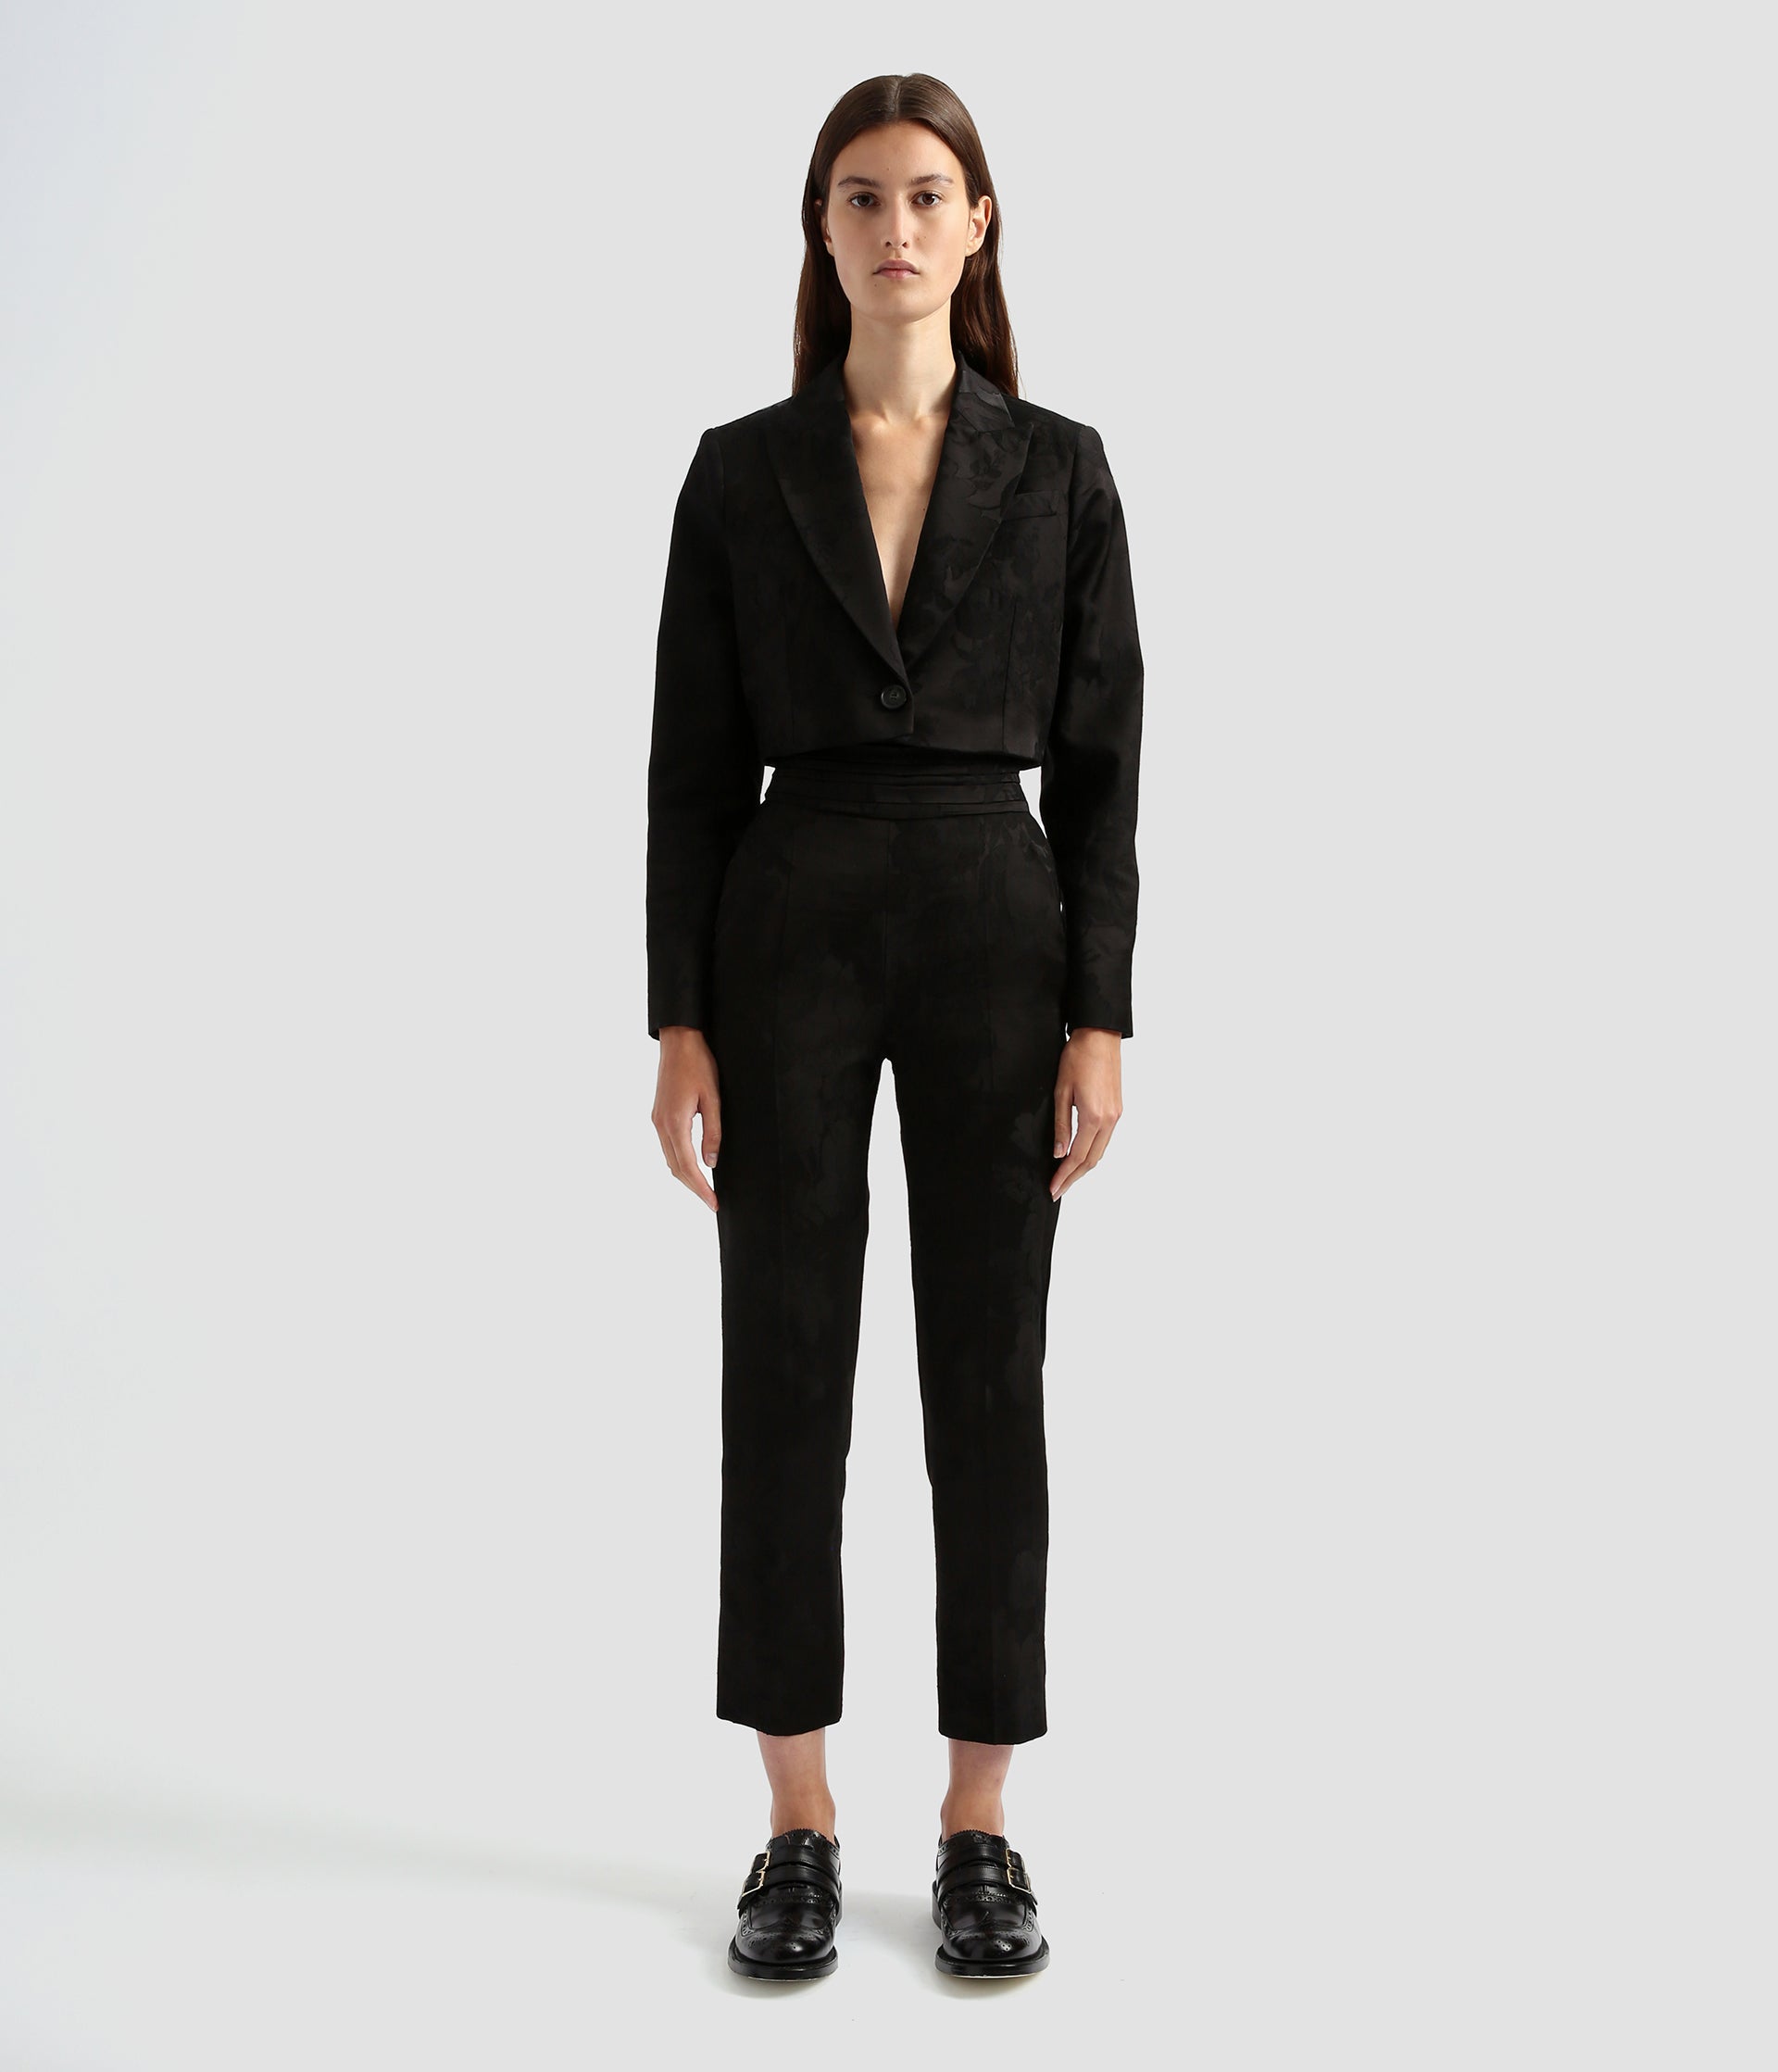 Tailored cropped boxy jacket by the designer Erdem. It's a contemporary take on the classic single breasted blazer with a dramatic crop and deep v neck.  Worn here with the matching tailored slim fit trousers. 